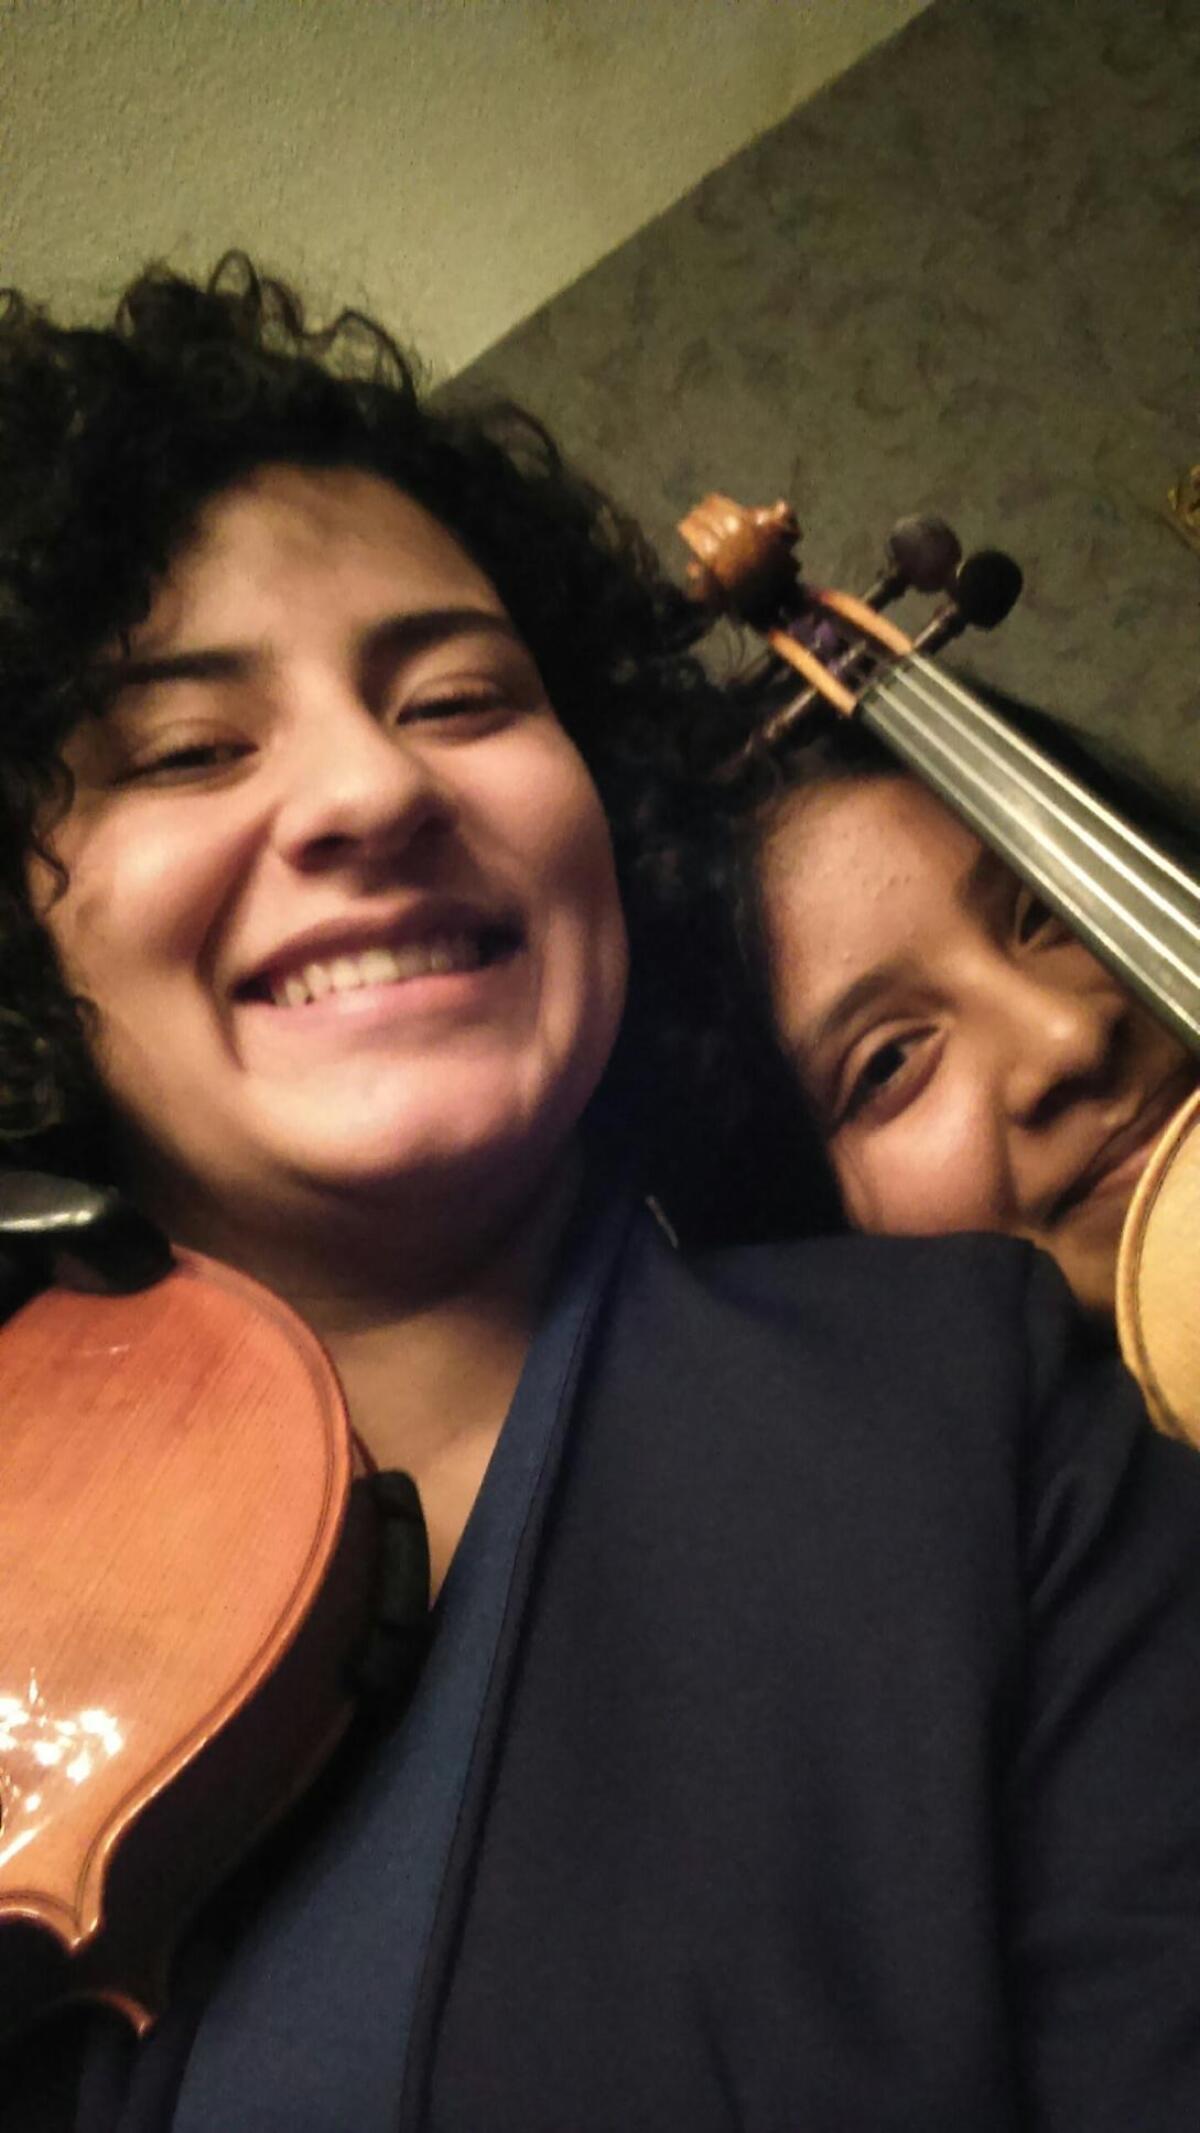 A quick first violin selfie with Sajhal Bautista before we go on.